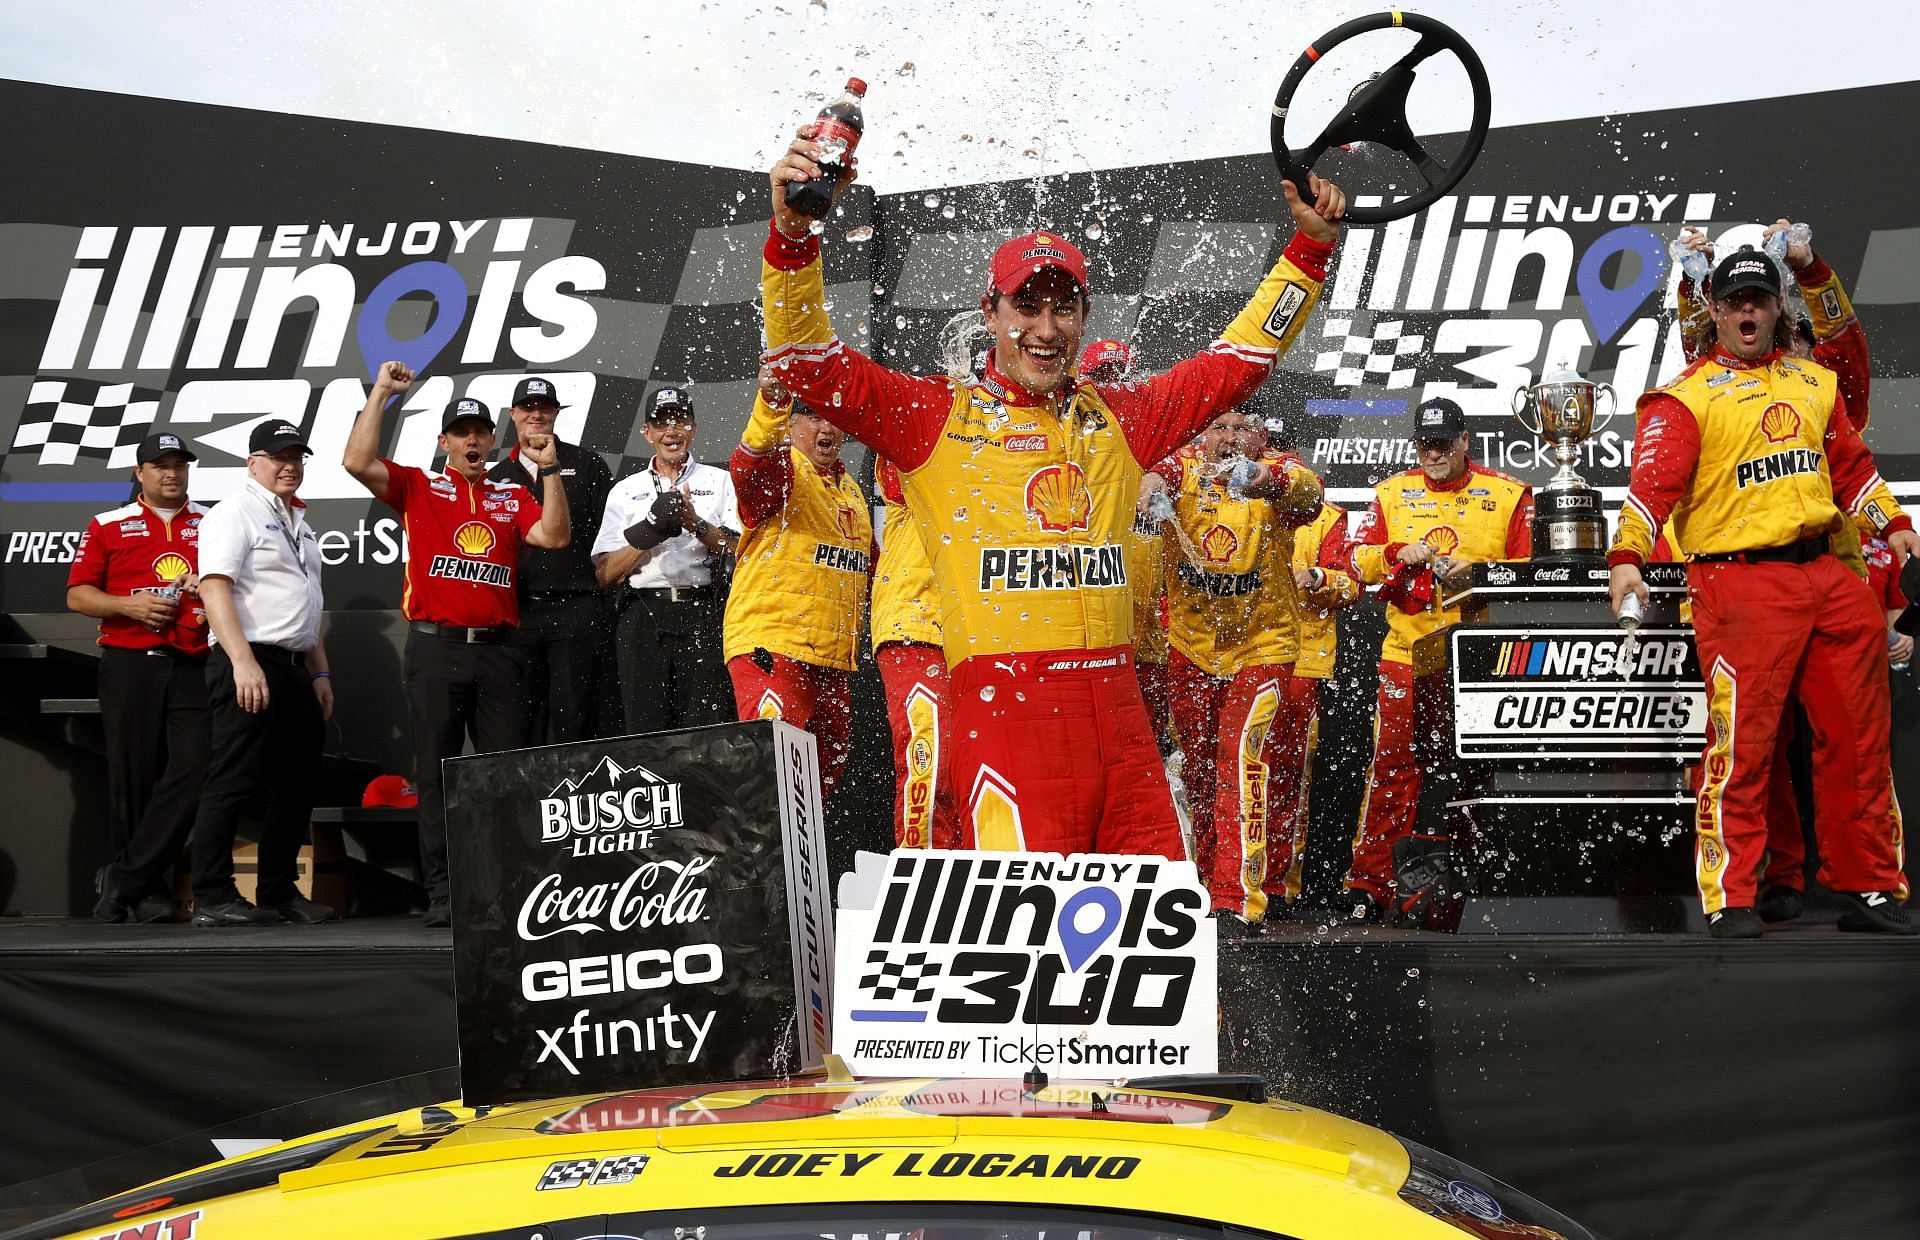 Joey Logano celebrates in victory lane after winning the NASCAR Cup Series Enjoy Illinois 300 at WWT Raceway (Photo by Sean Gardner/Getty Images)